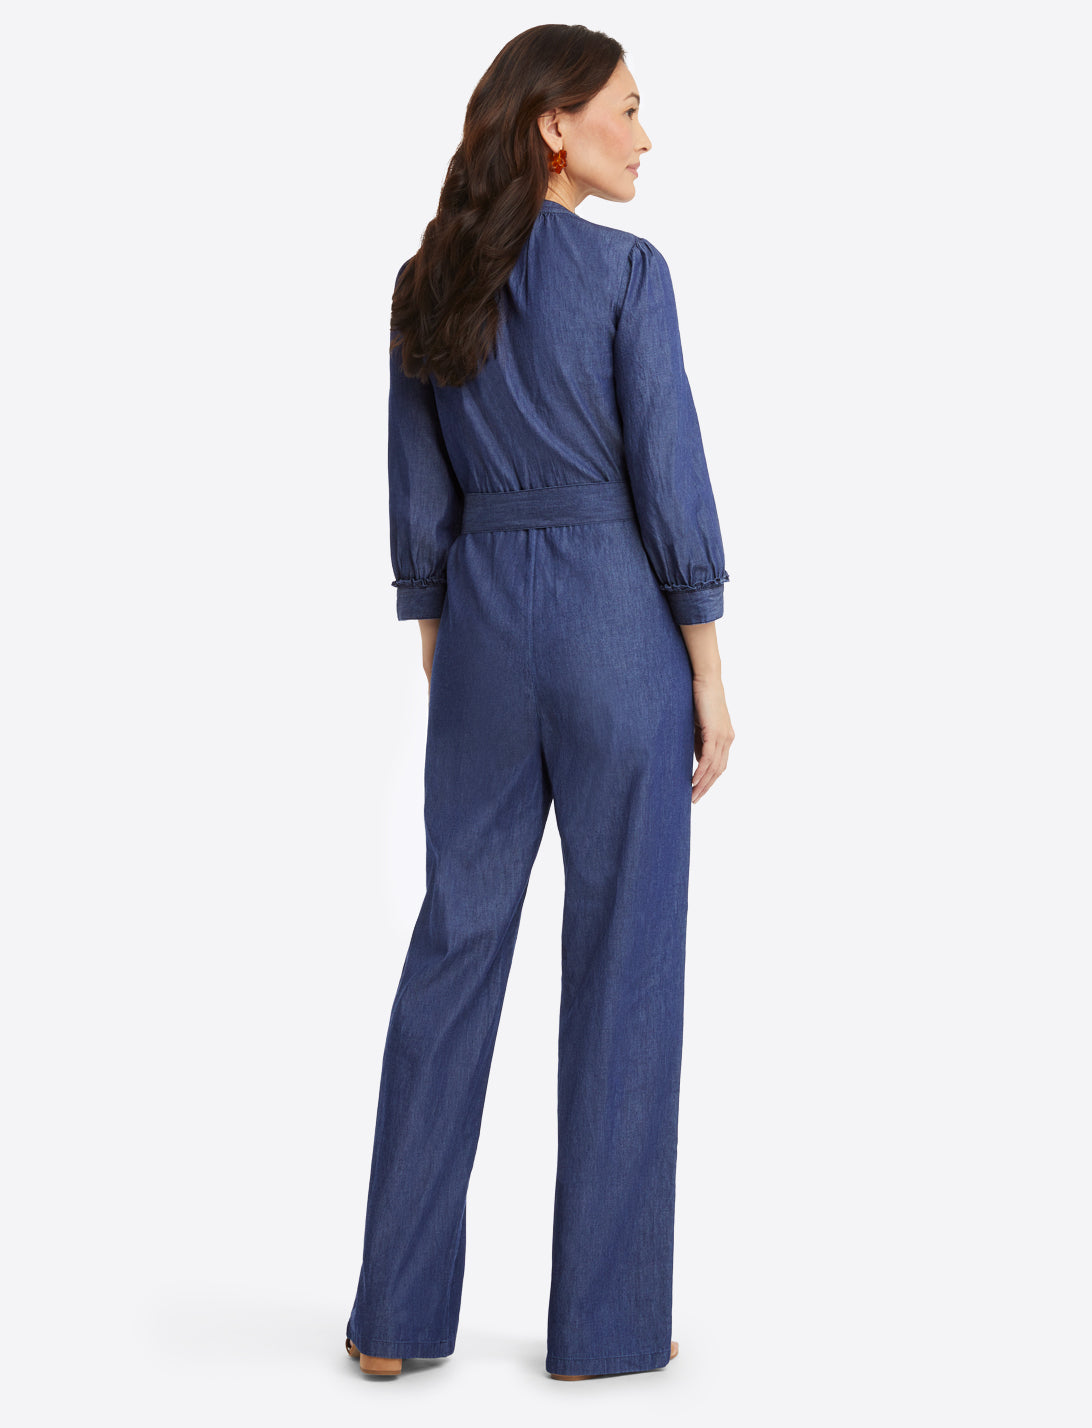 Tie Waist Jumpsuit in Chambray